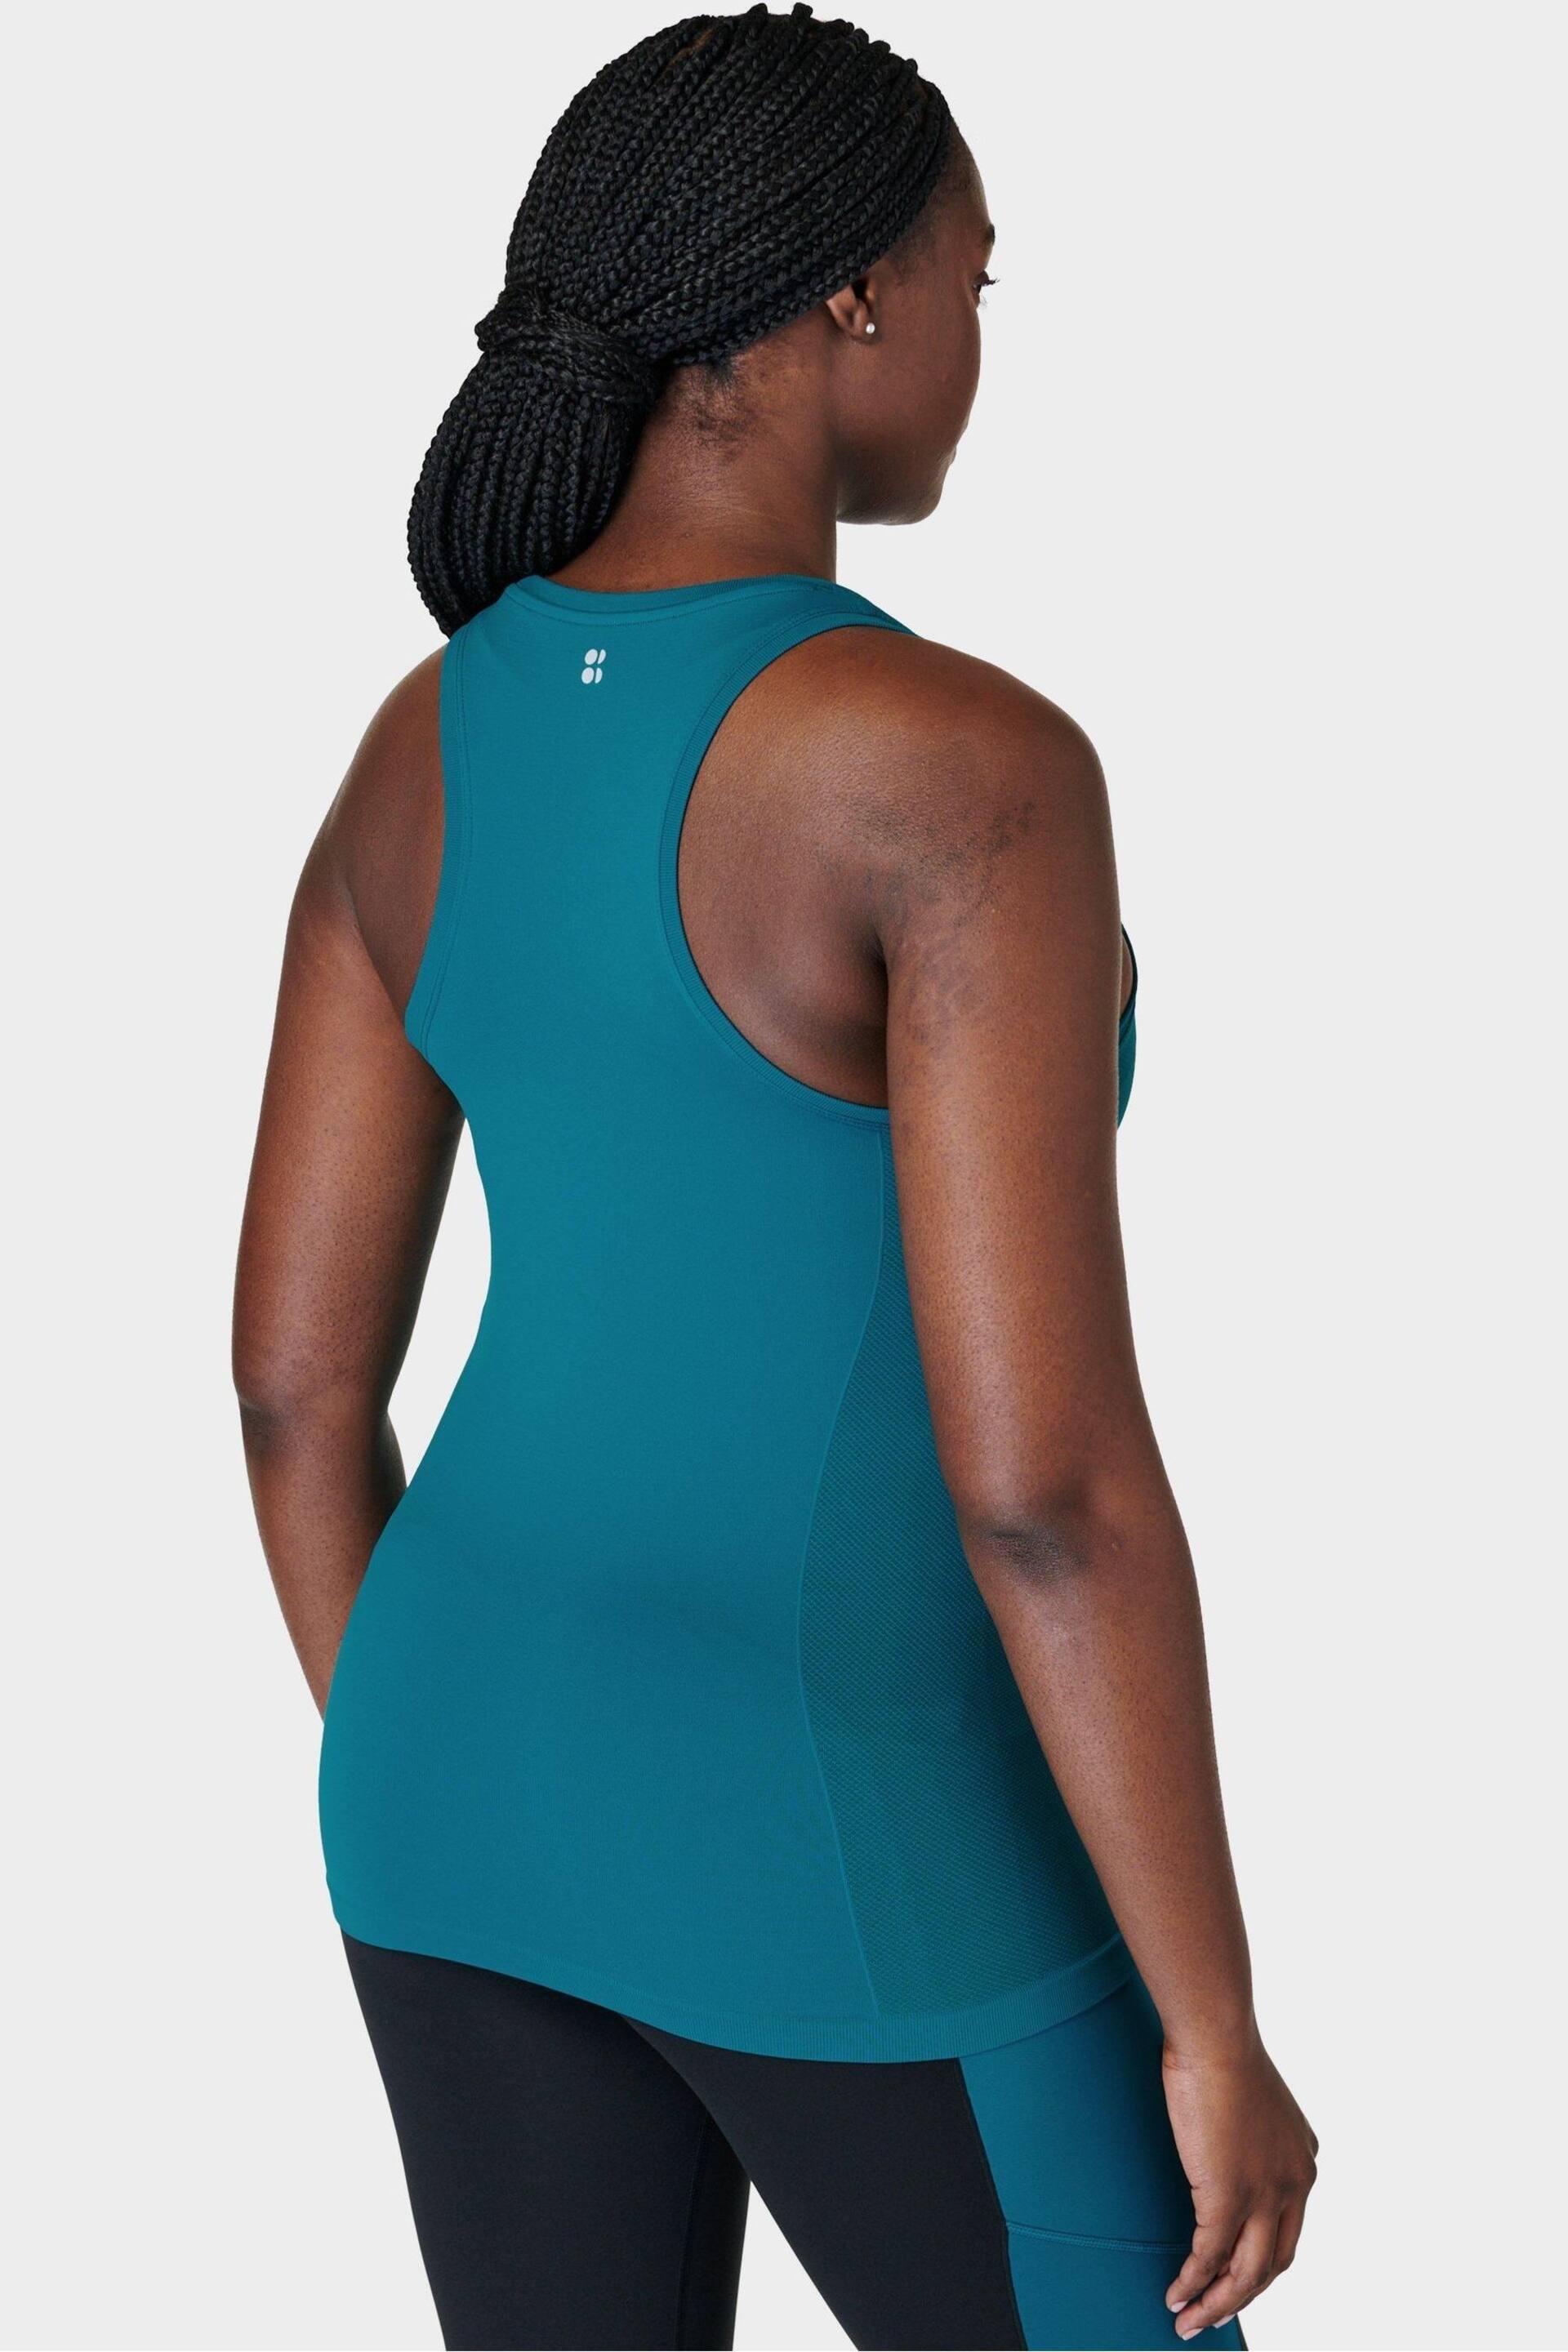 Sweaty Betty Reef Teal Blue Athlete Seamless Workout Tank Top - Image 3 of 7